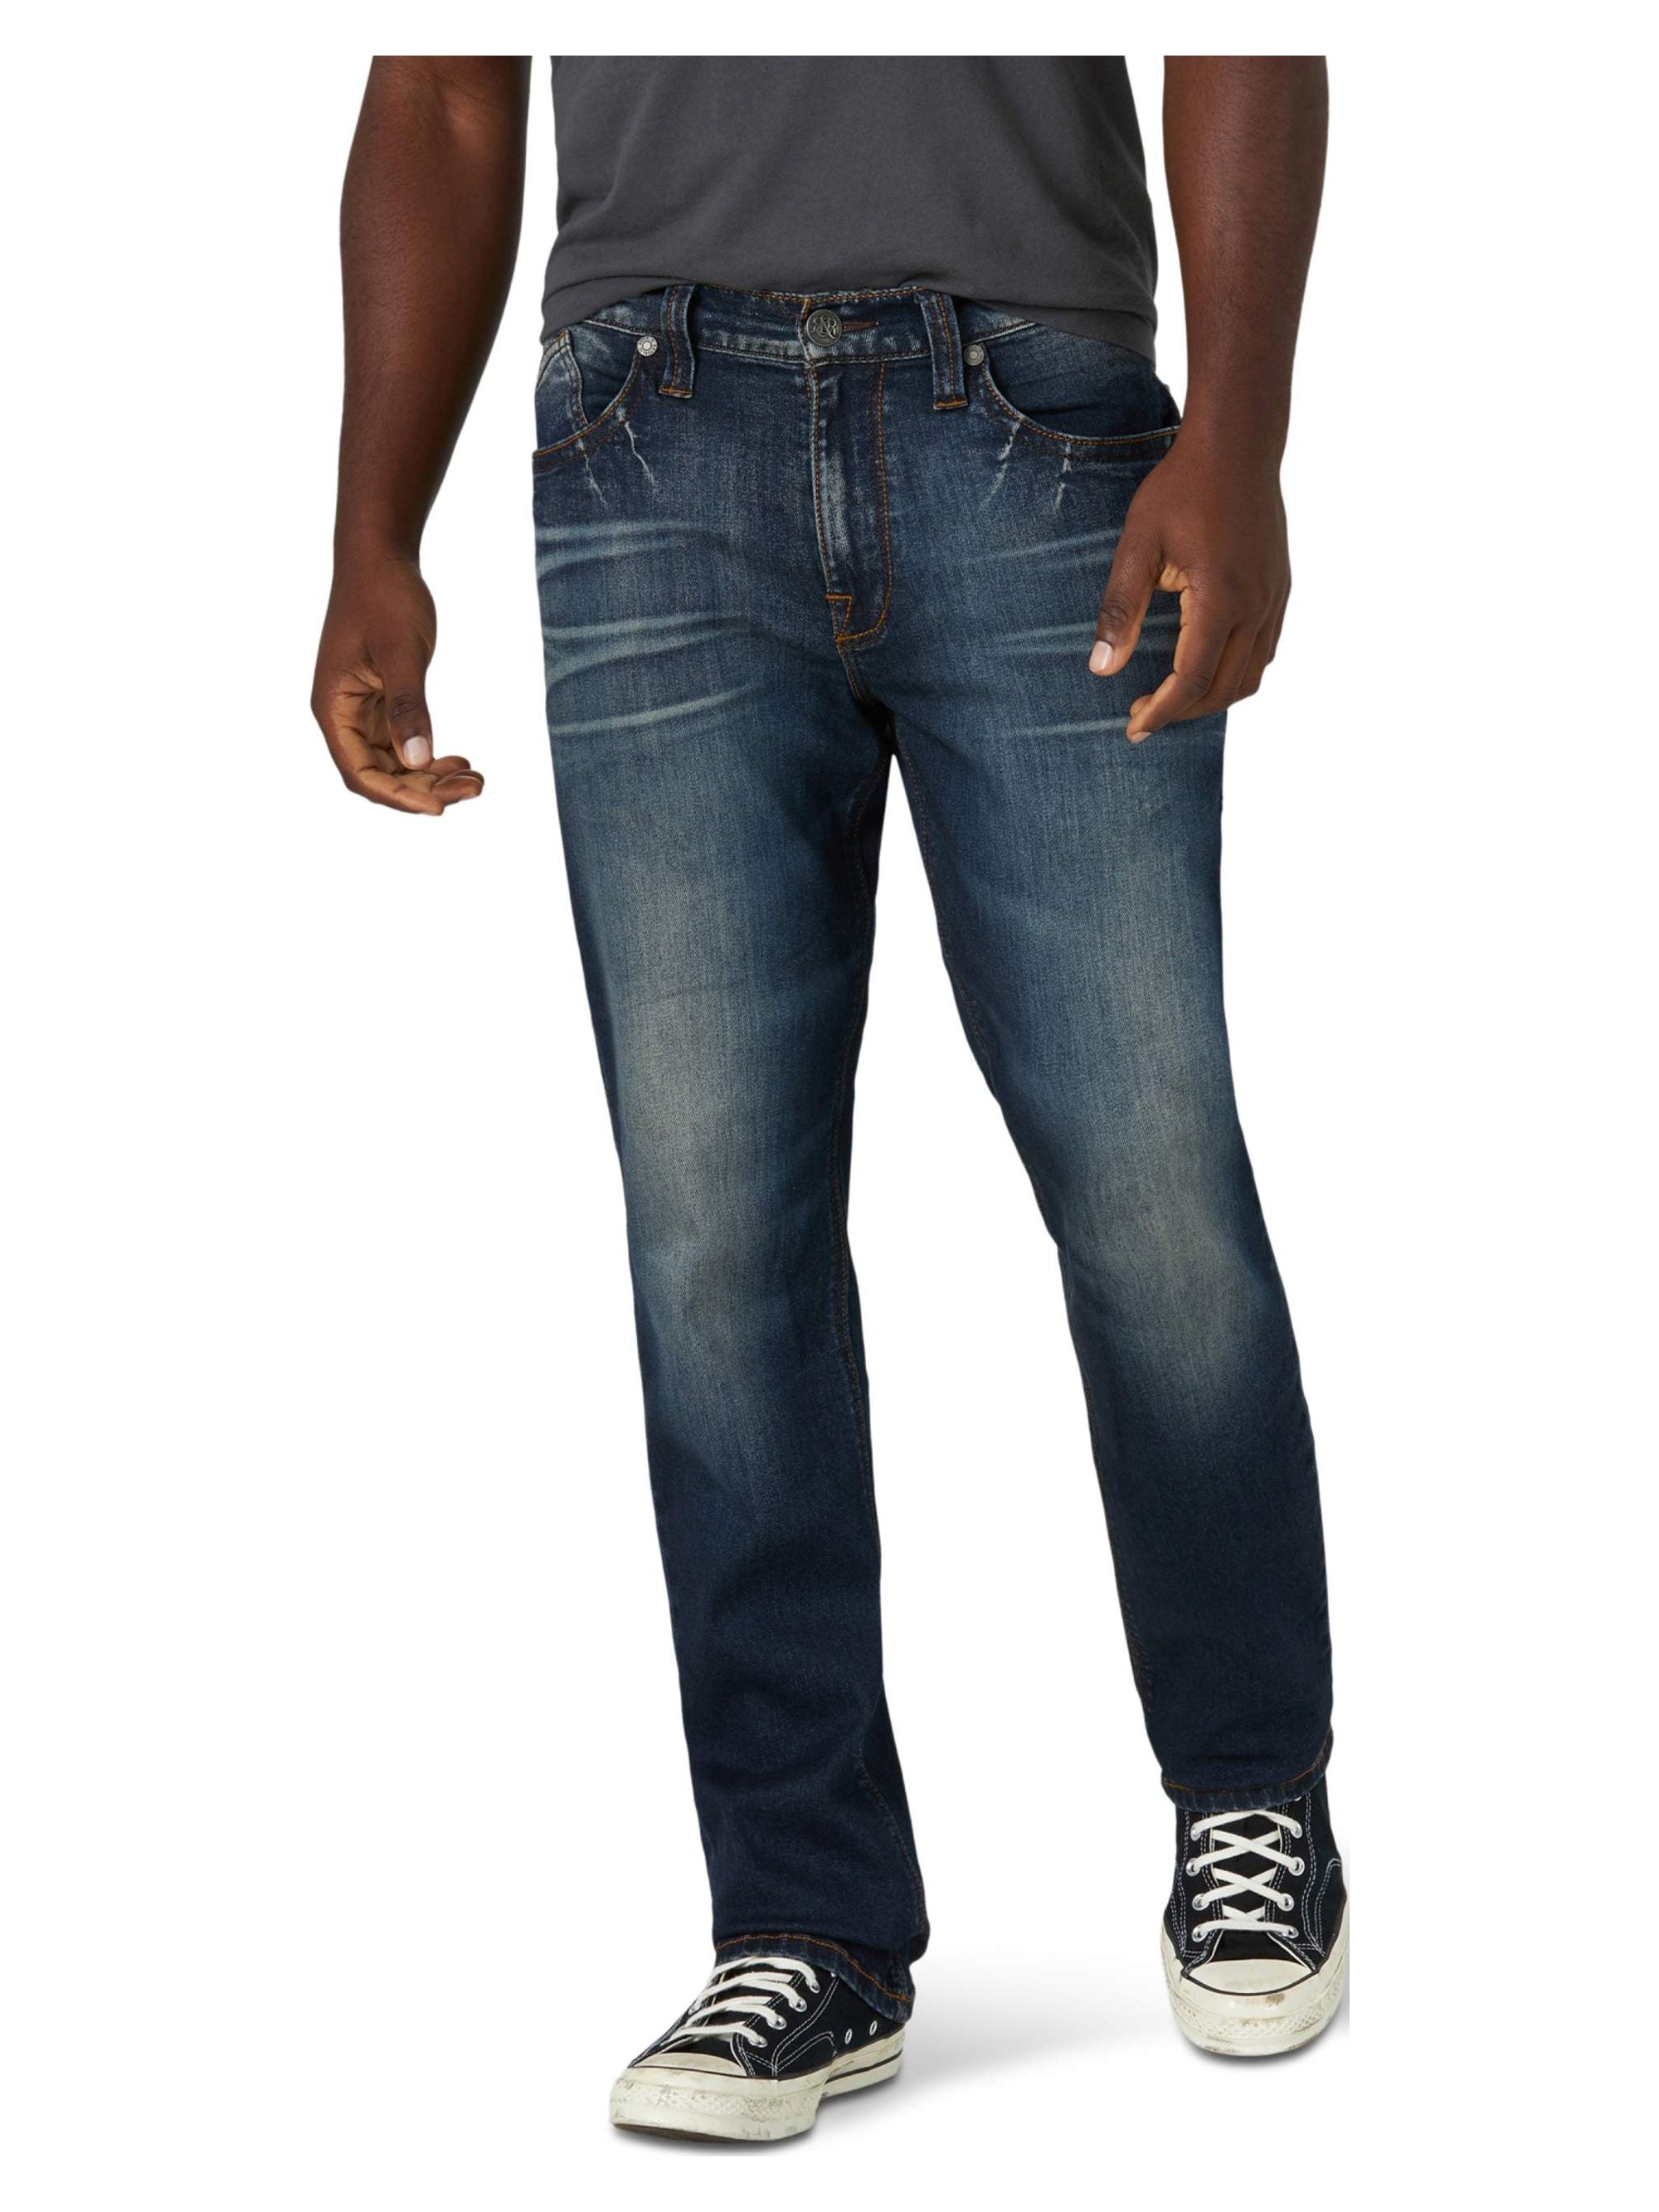 Rock & Republic Men's Relaxed Straight Leg Jean with Ultra Comfort Denim - image 1 of 6